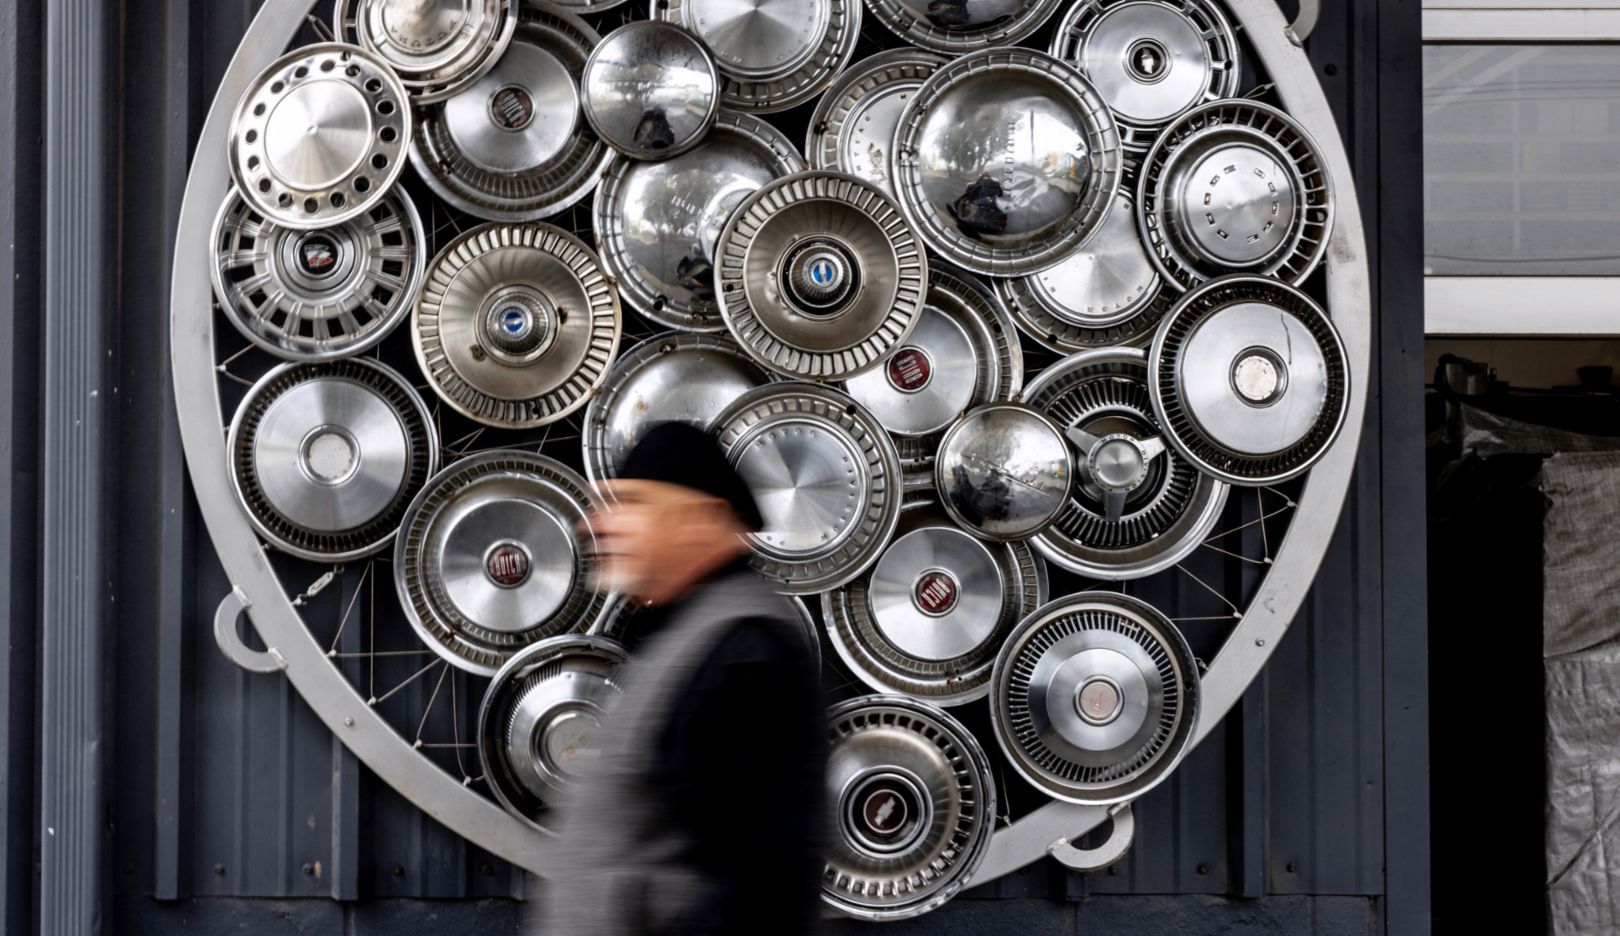 Well rounded: Gordon Huether created a work of art made of hubcaps to serve as a gateway installation for a parking garage. A thousand hubcaps form a huge sphere in San Mateo, California. 